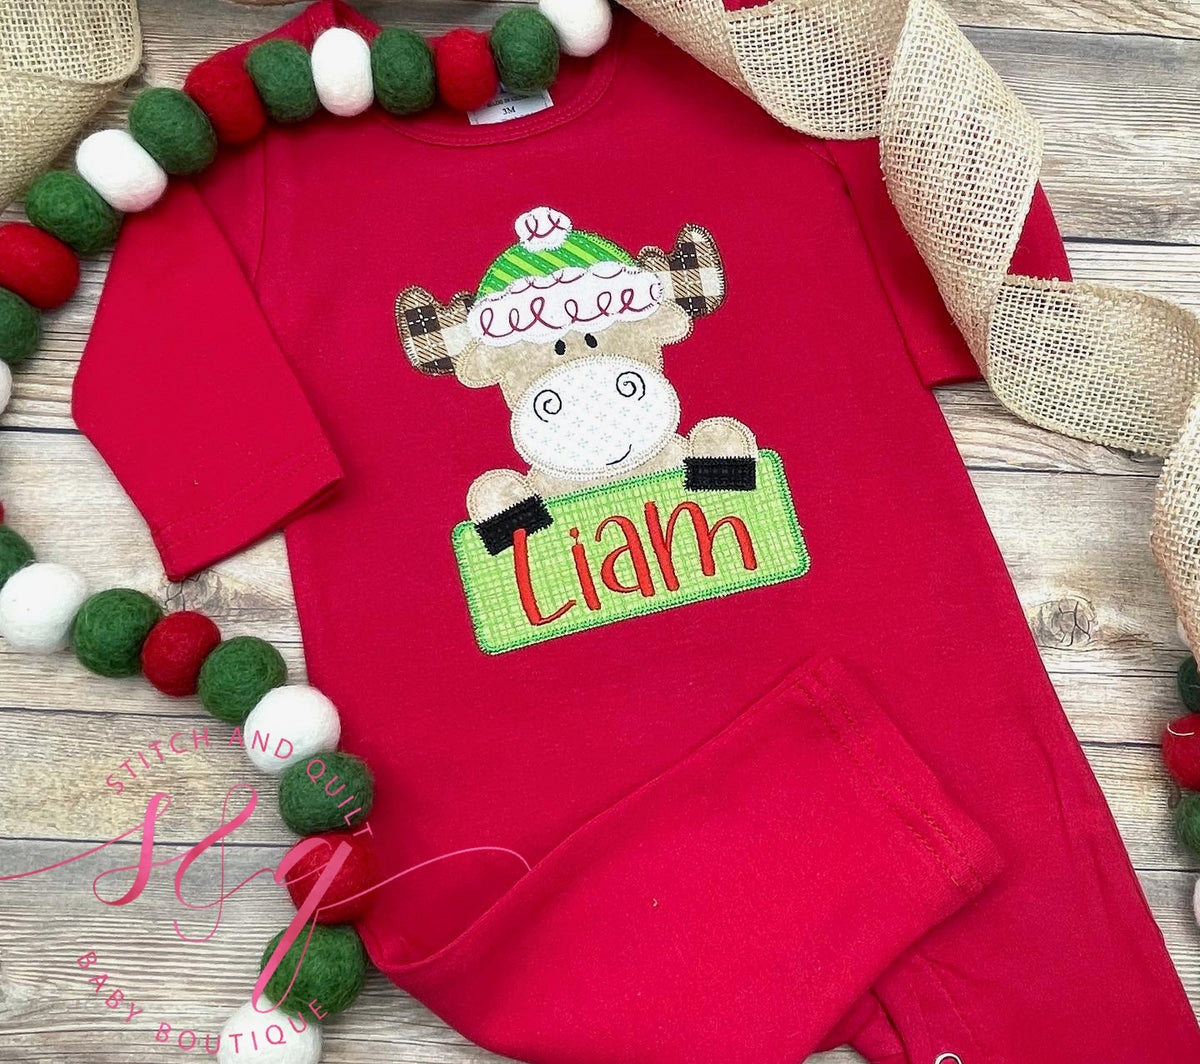 Boys Toddler and Infant Christmas Romper, Holiday Romper for boys, Christmas romper for boys